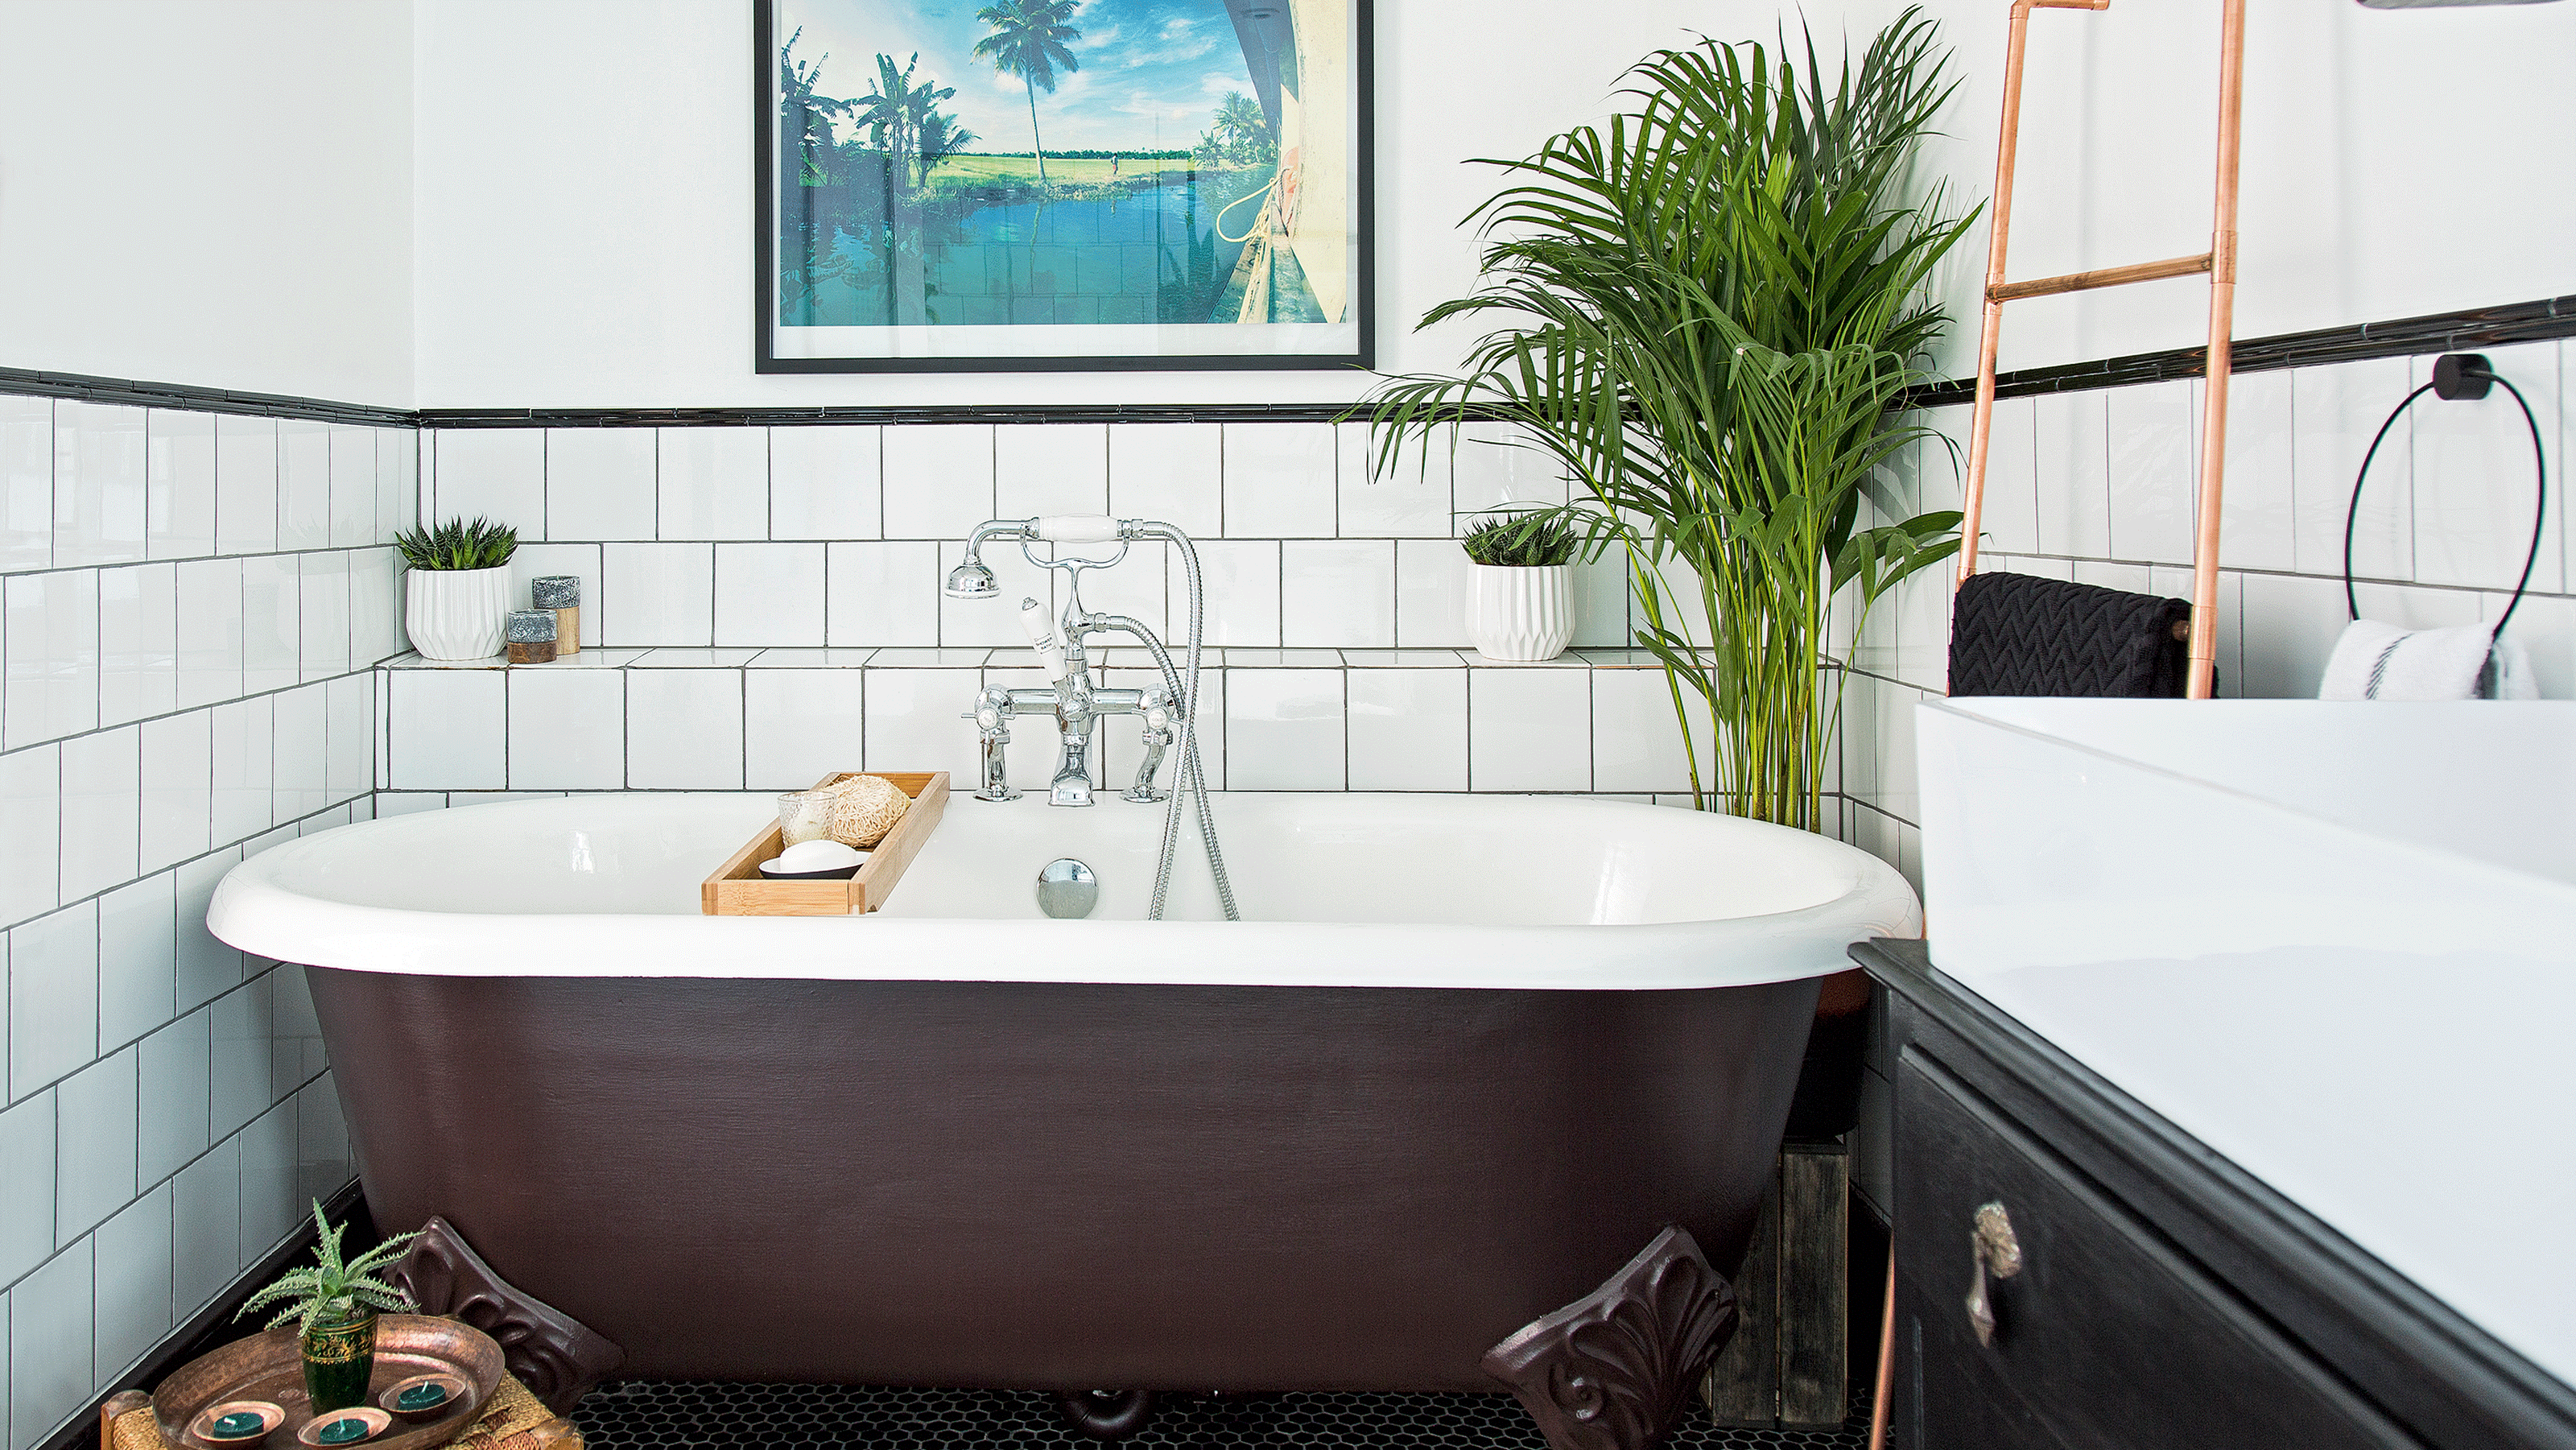 Black bathtub with white tiles and pictures